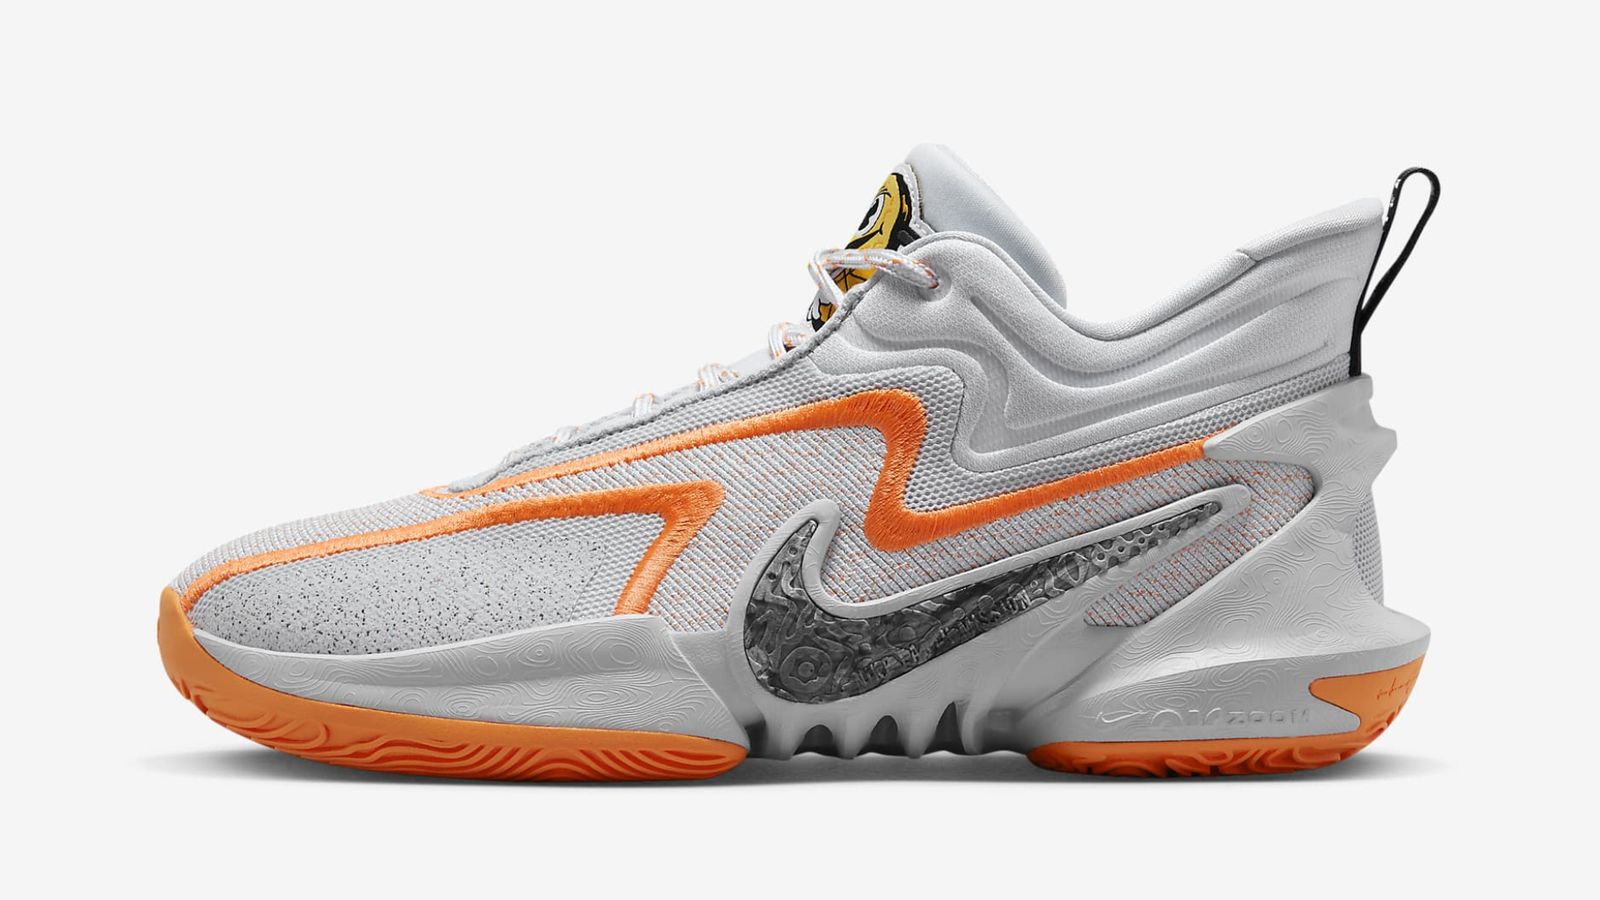 Nike Cosmic Unity 2 product image of a Wolf Grey basketball shoe with orange and black details.